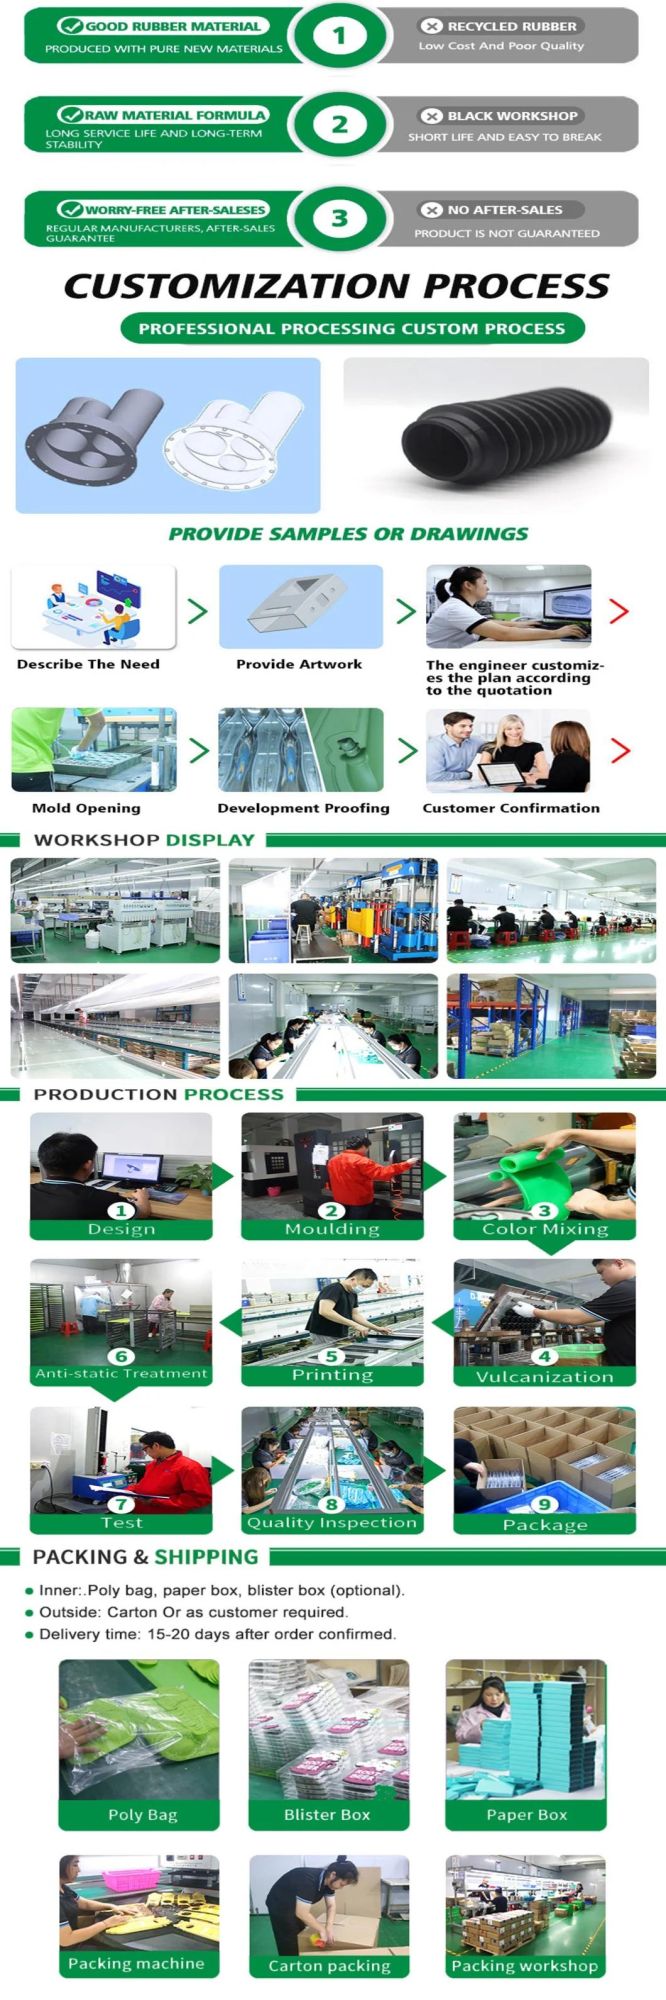 Customized Plastic Items Furniture Accessories Plastic Injection Mold Parts Table Leg Extenders Sofa Plastic Legs